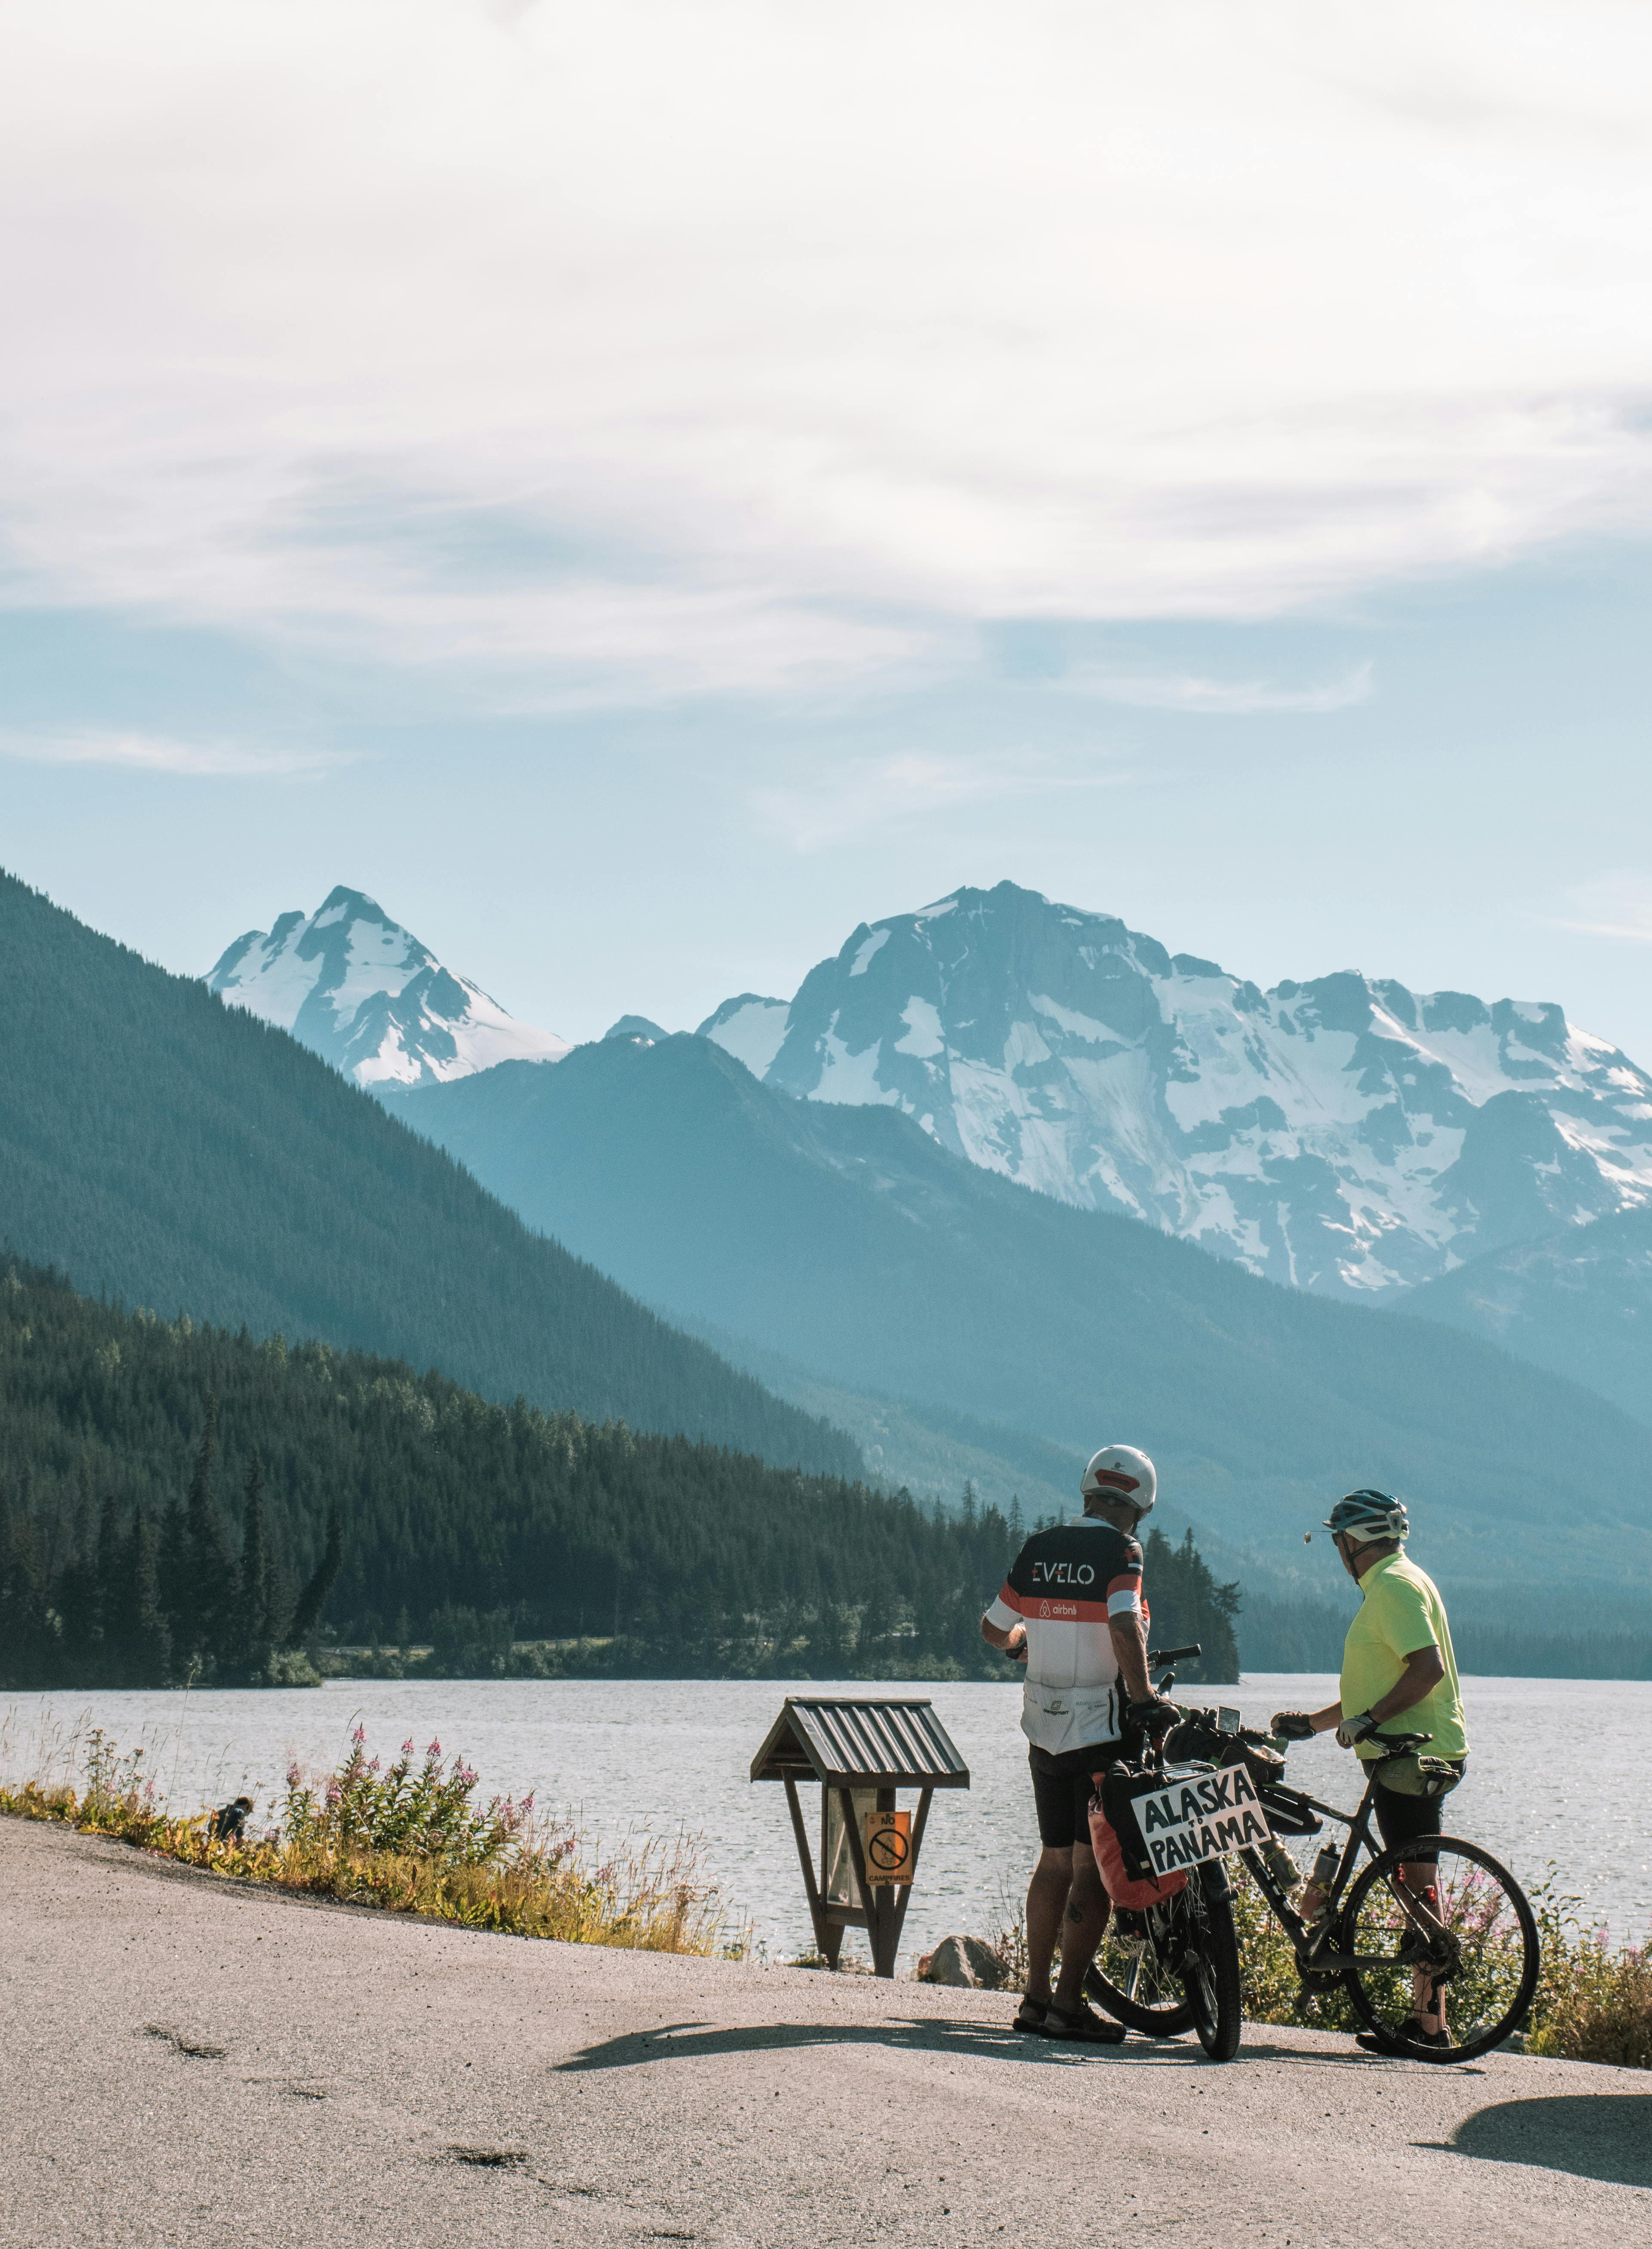 two people on bikes near a lake with mountains in the background